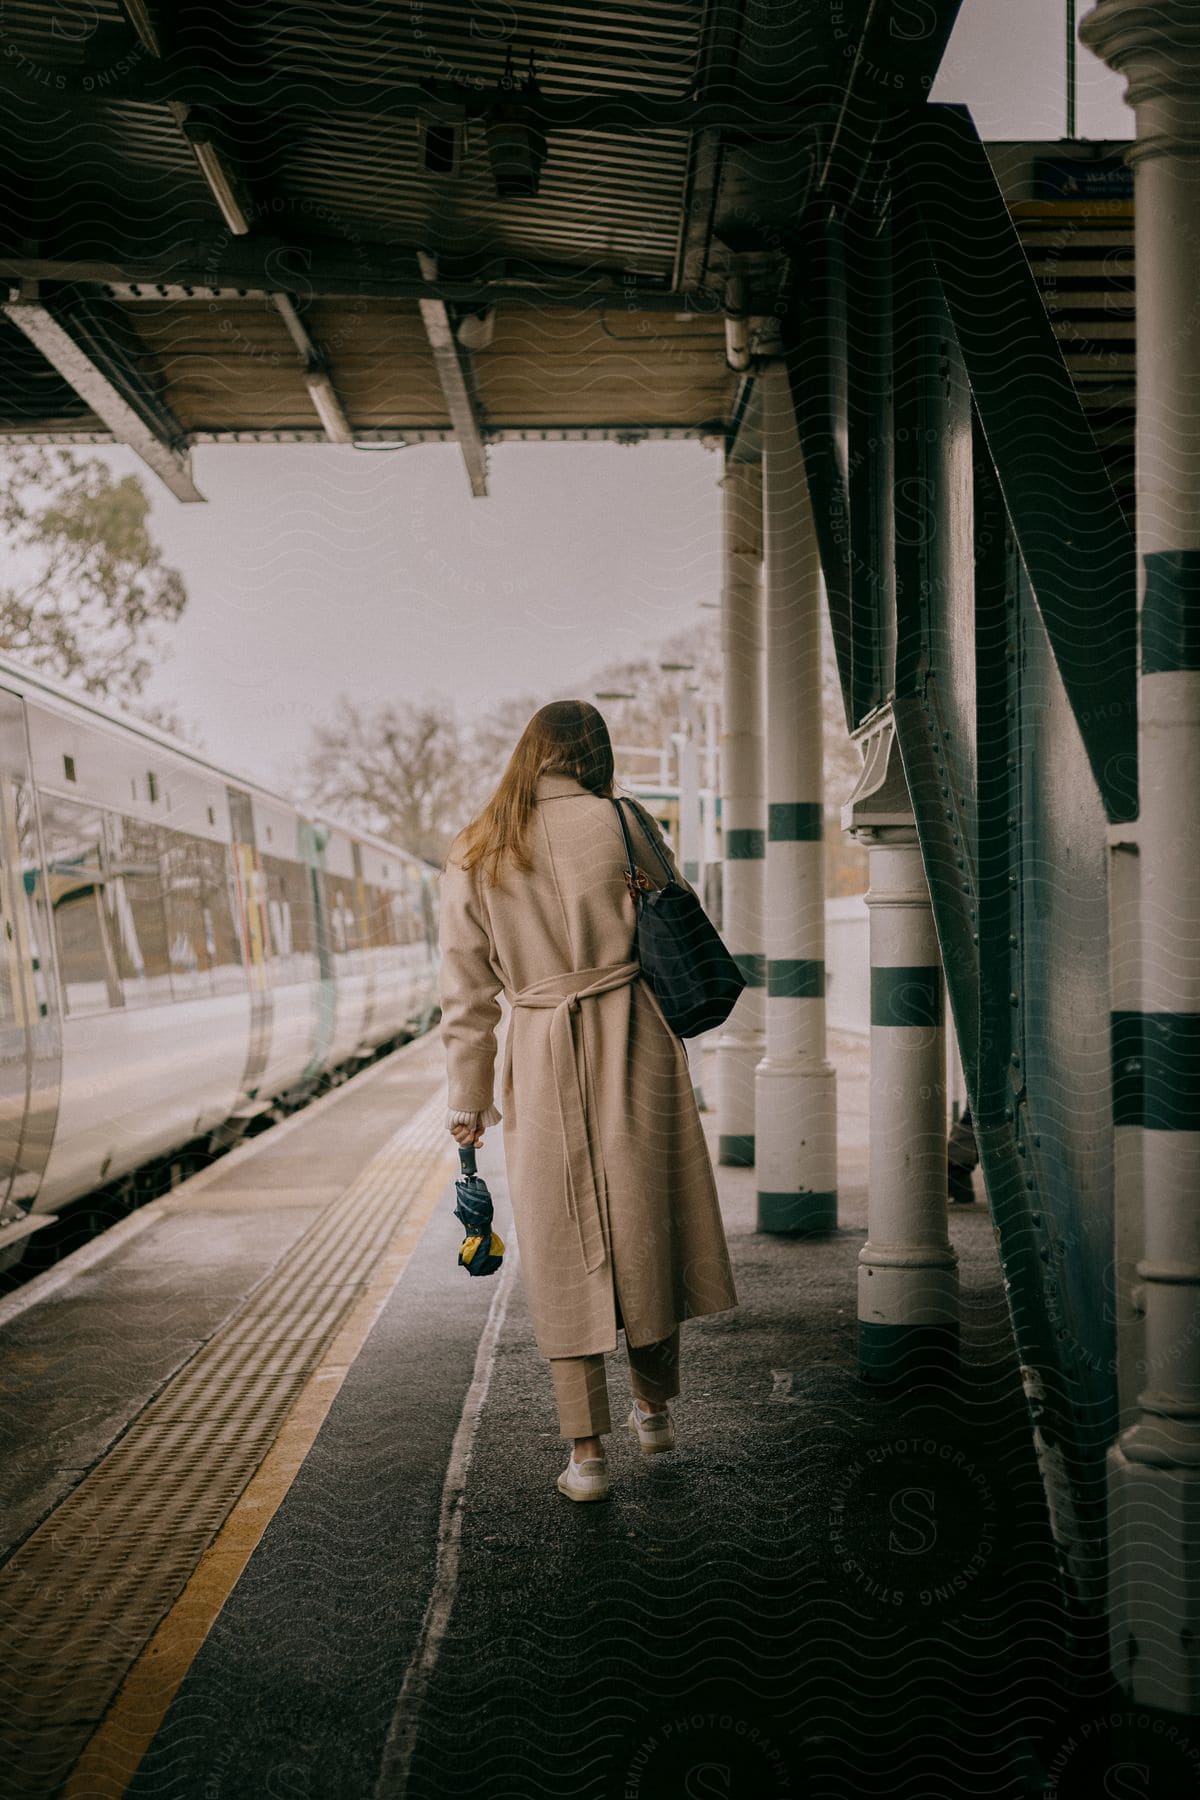 A woman walks next to a train at a train station wearing a coat